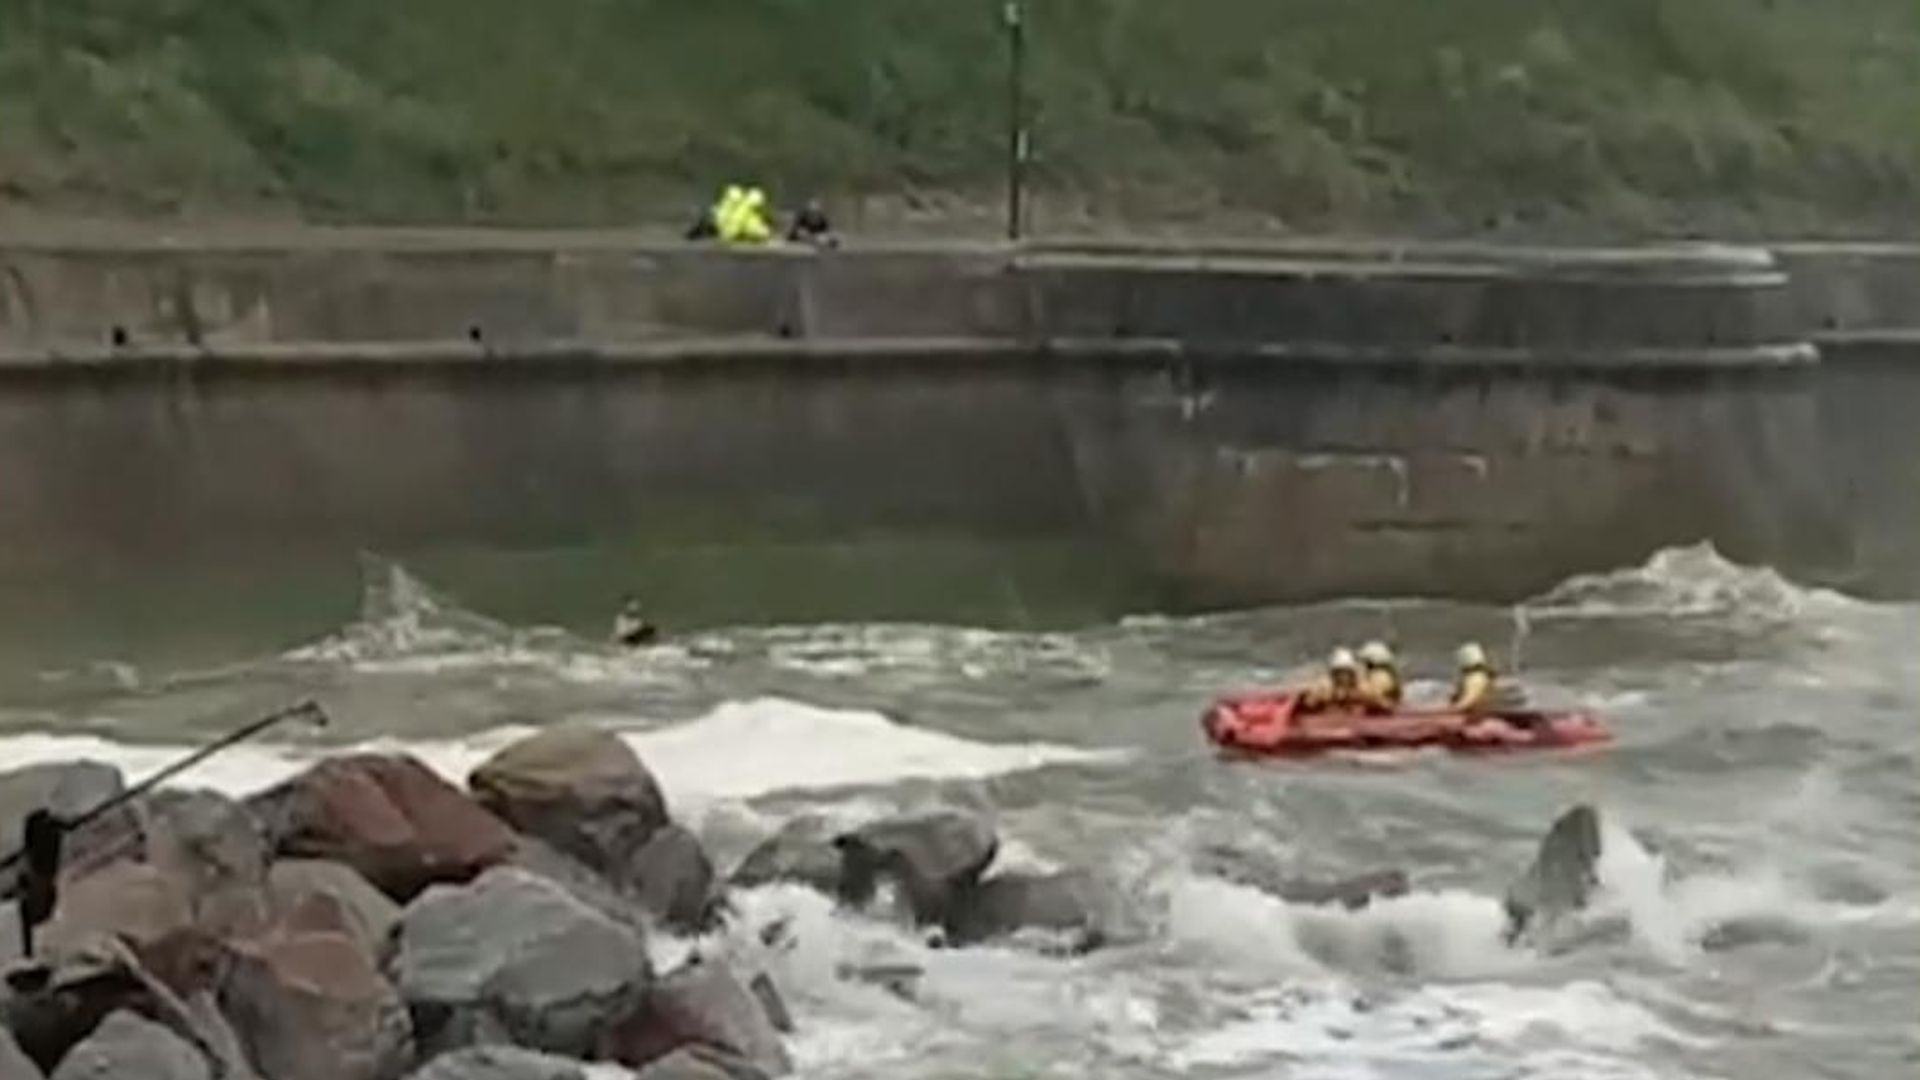 Man rescued from rough sea after jumping in to save dog